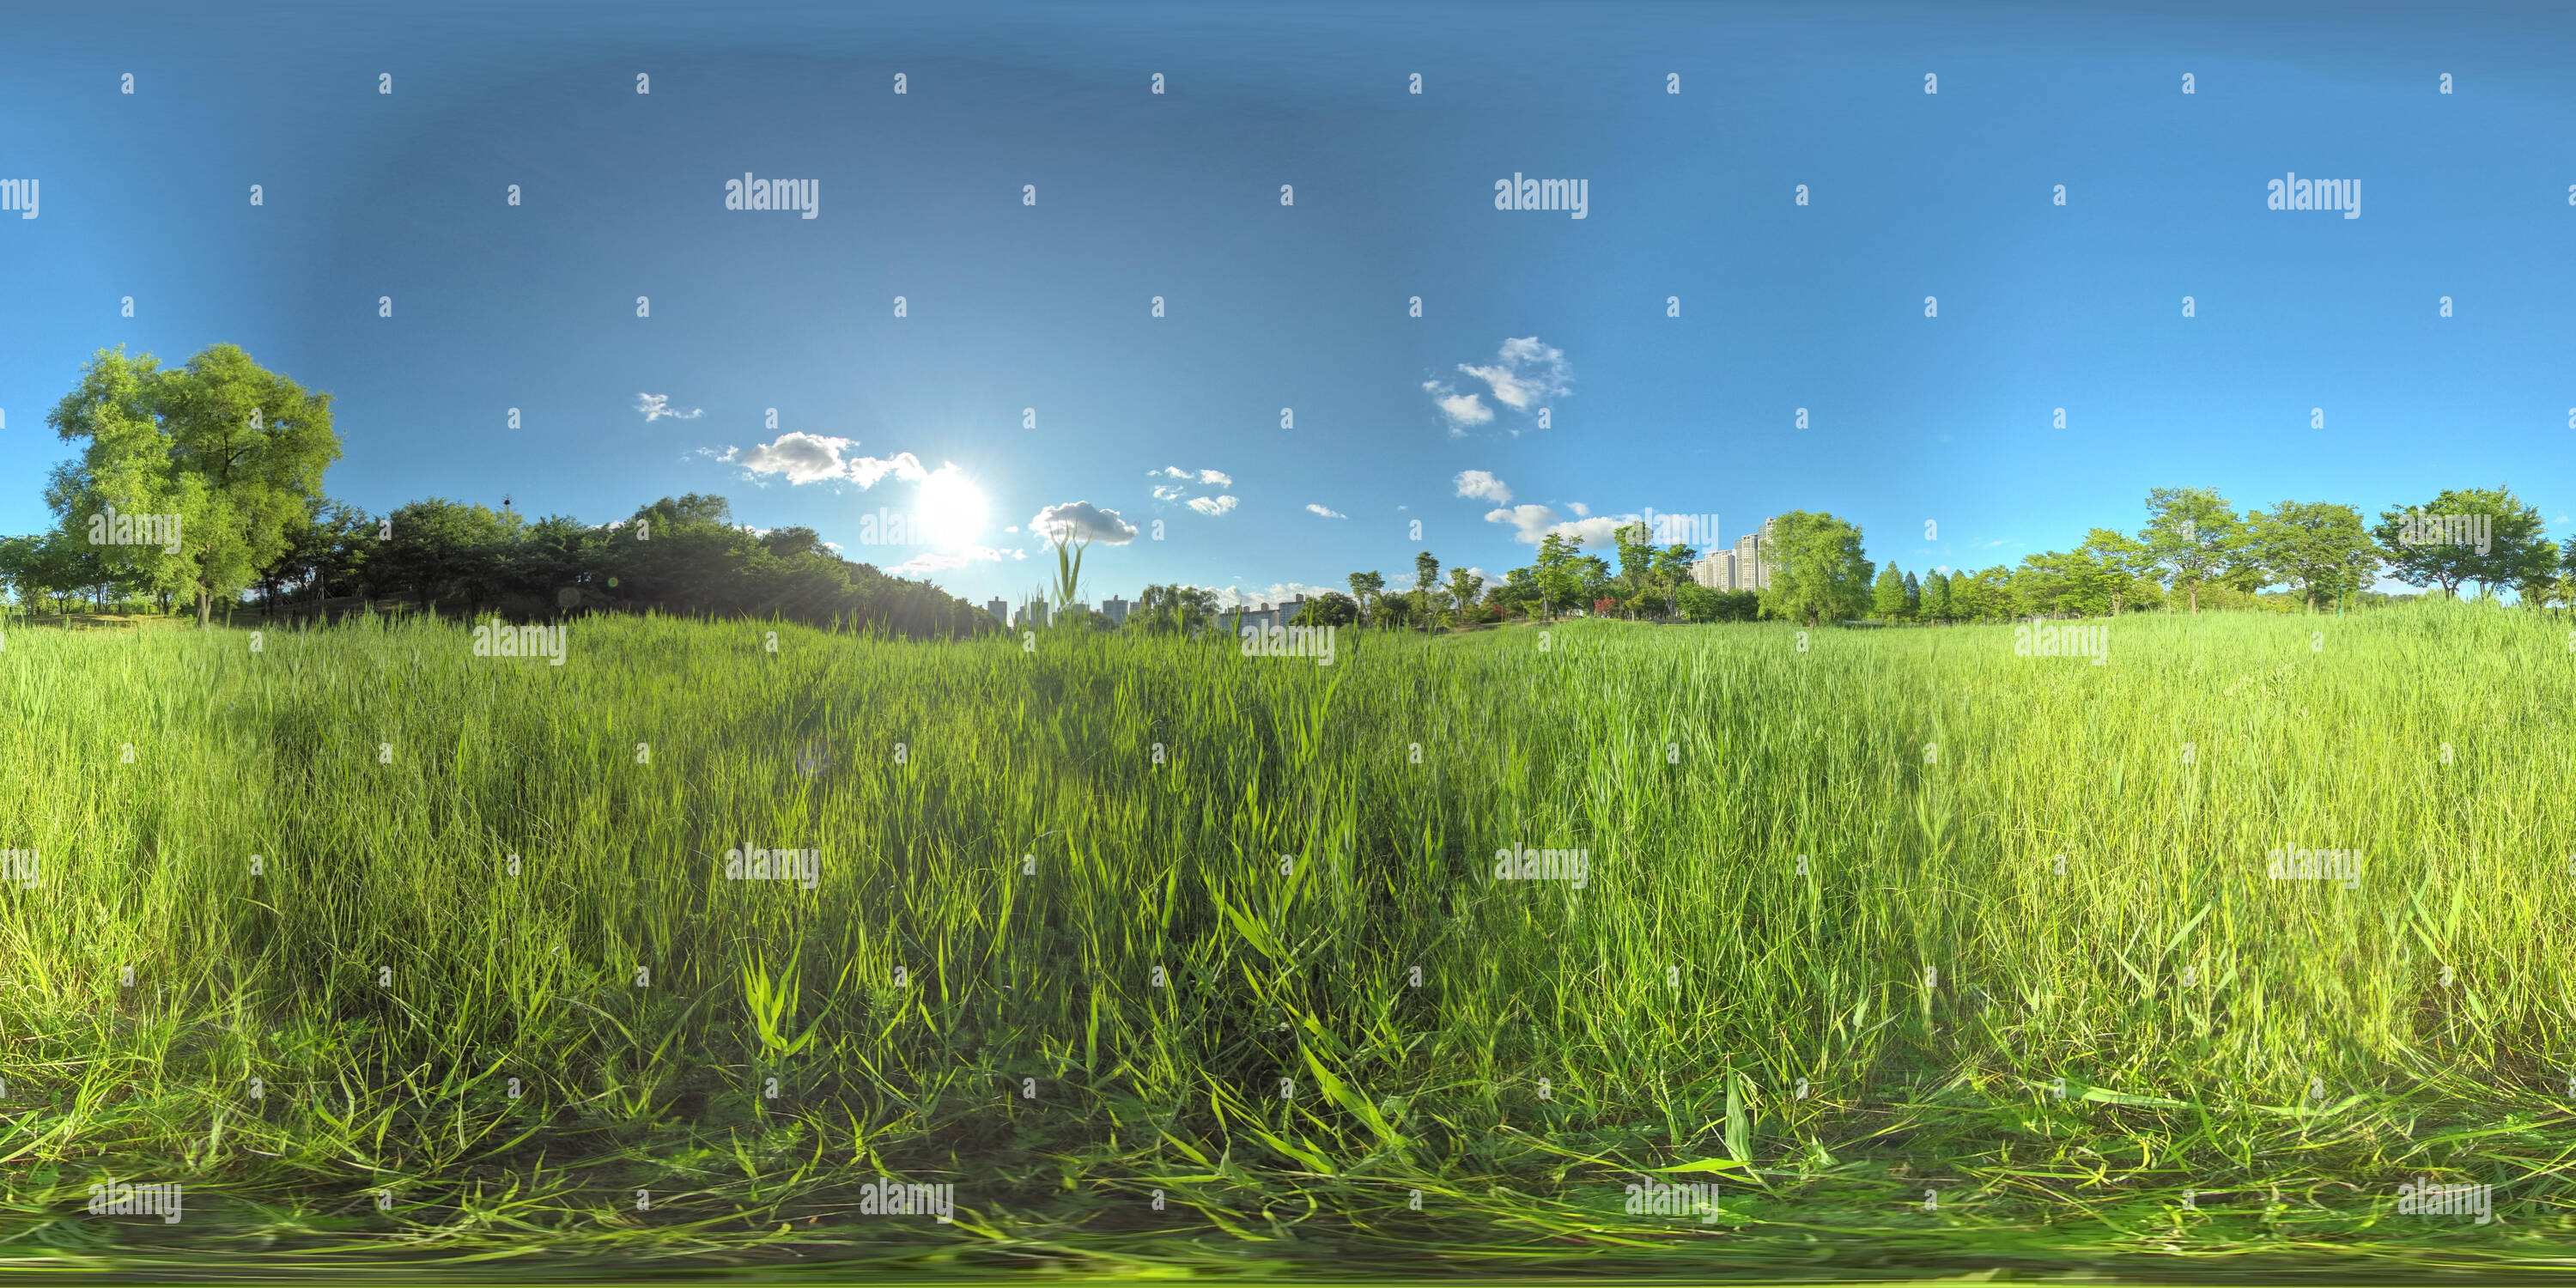 360 degree panoramic view of Ansan, South Korea - 7 June 2019. Panorama 360 degrees view in park. Forest and Park 360 image, VR AR content.